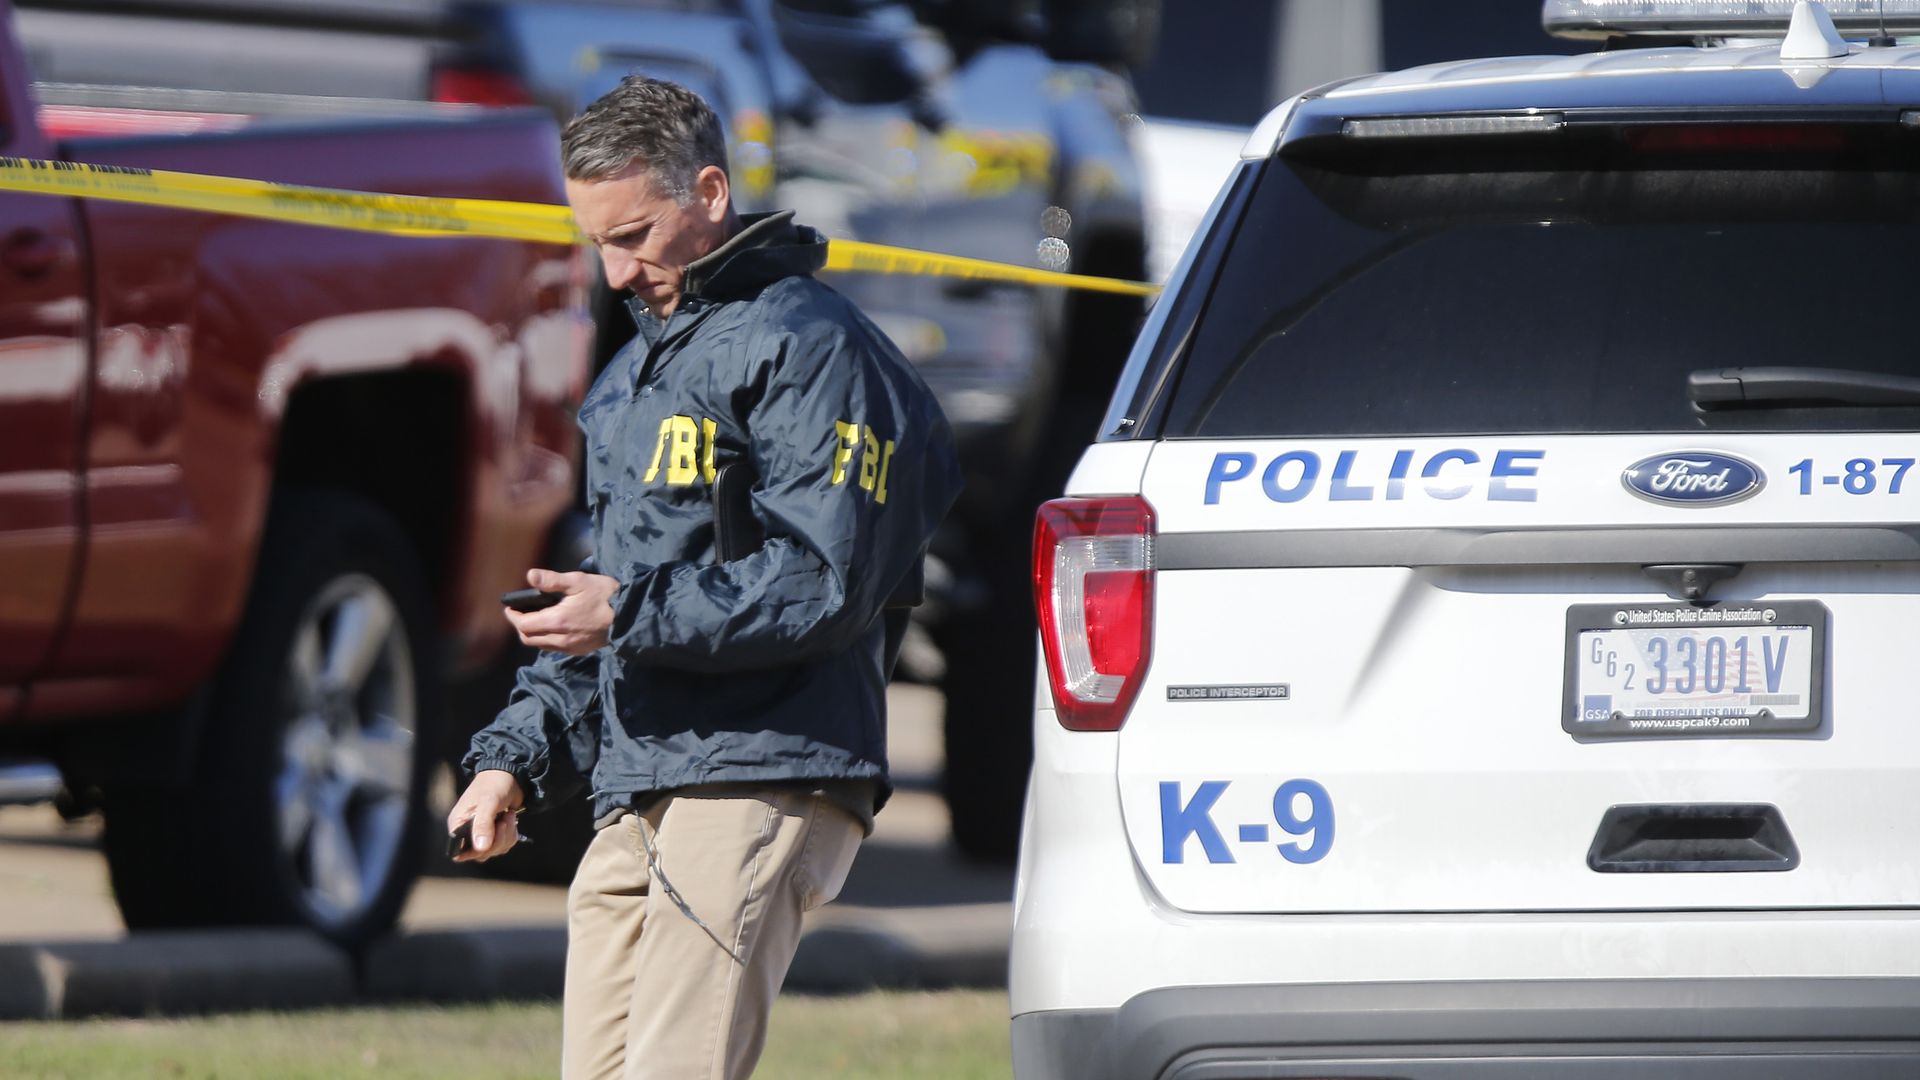 An FBI agent works the scene after a shooting took place during services at West Freeway Church of Christ on December 29, 2019 in White Settlement, Texas.